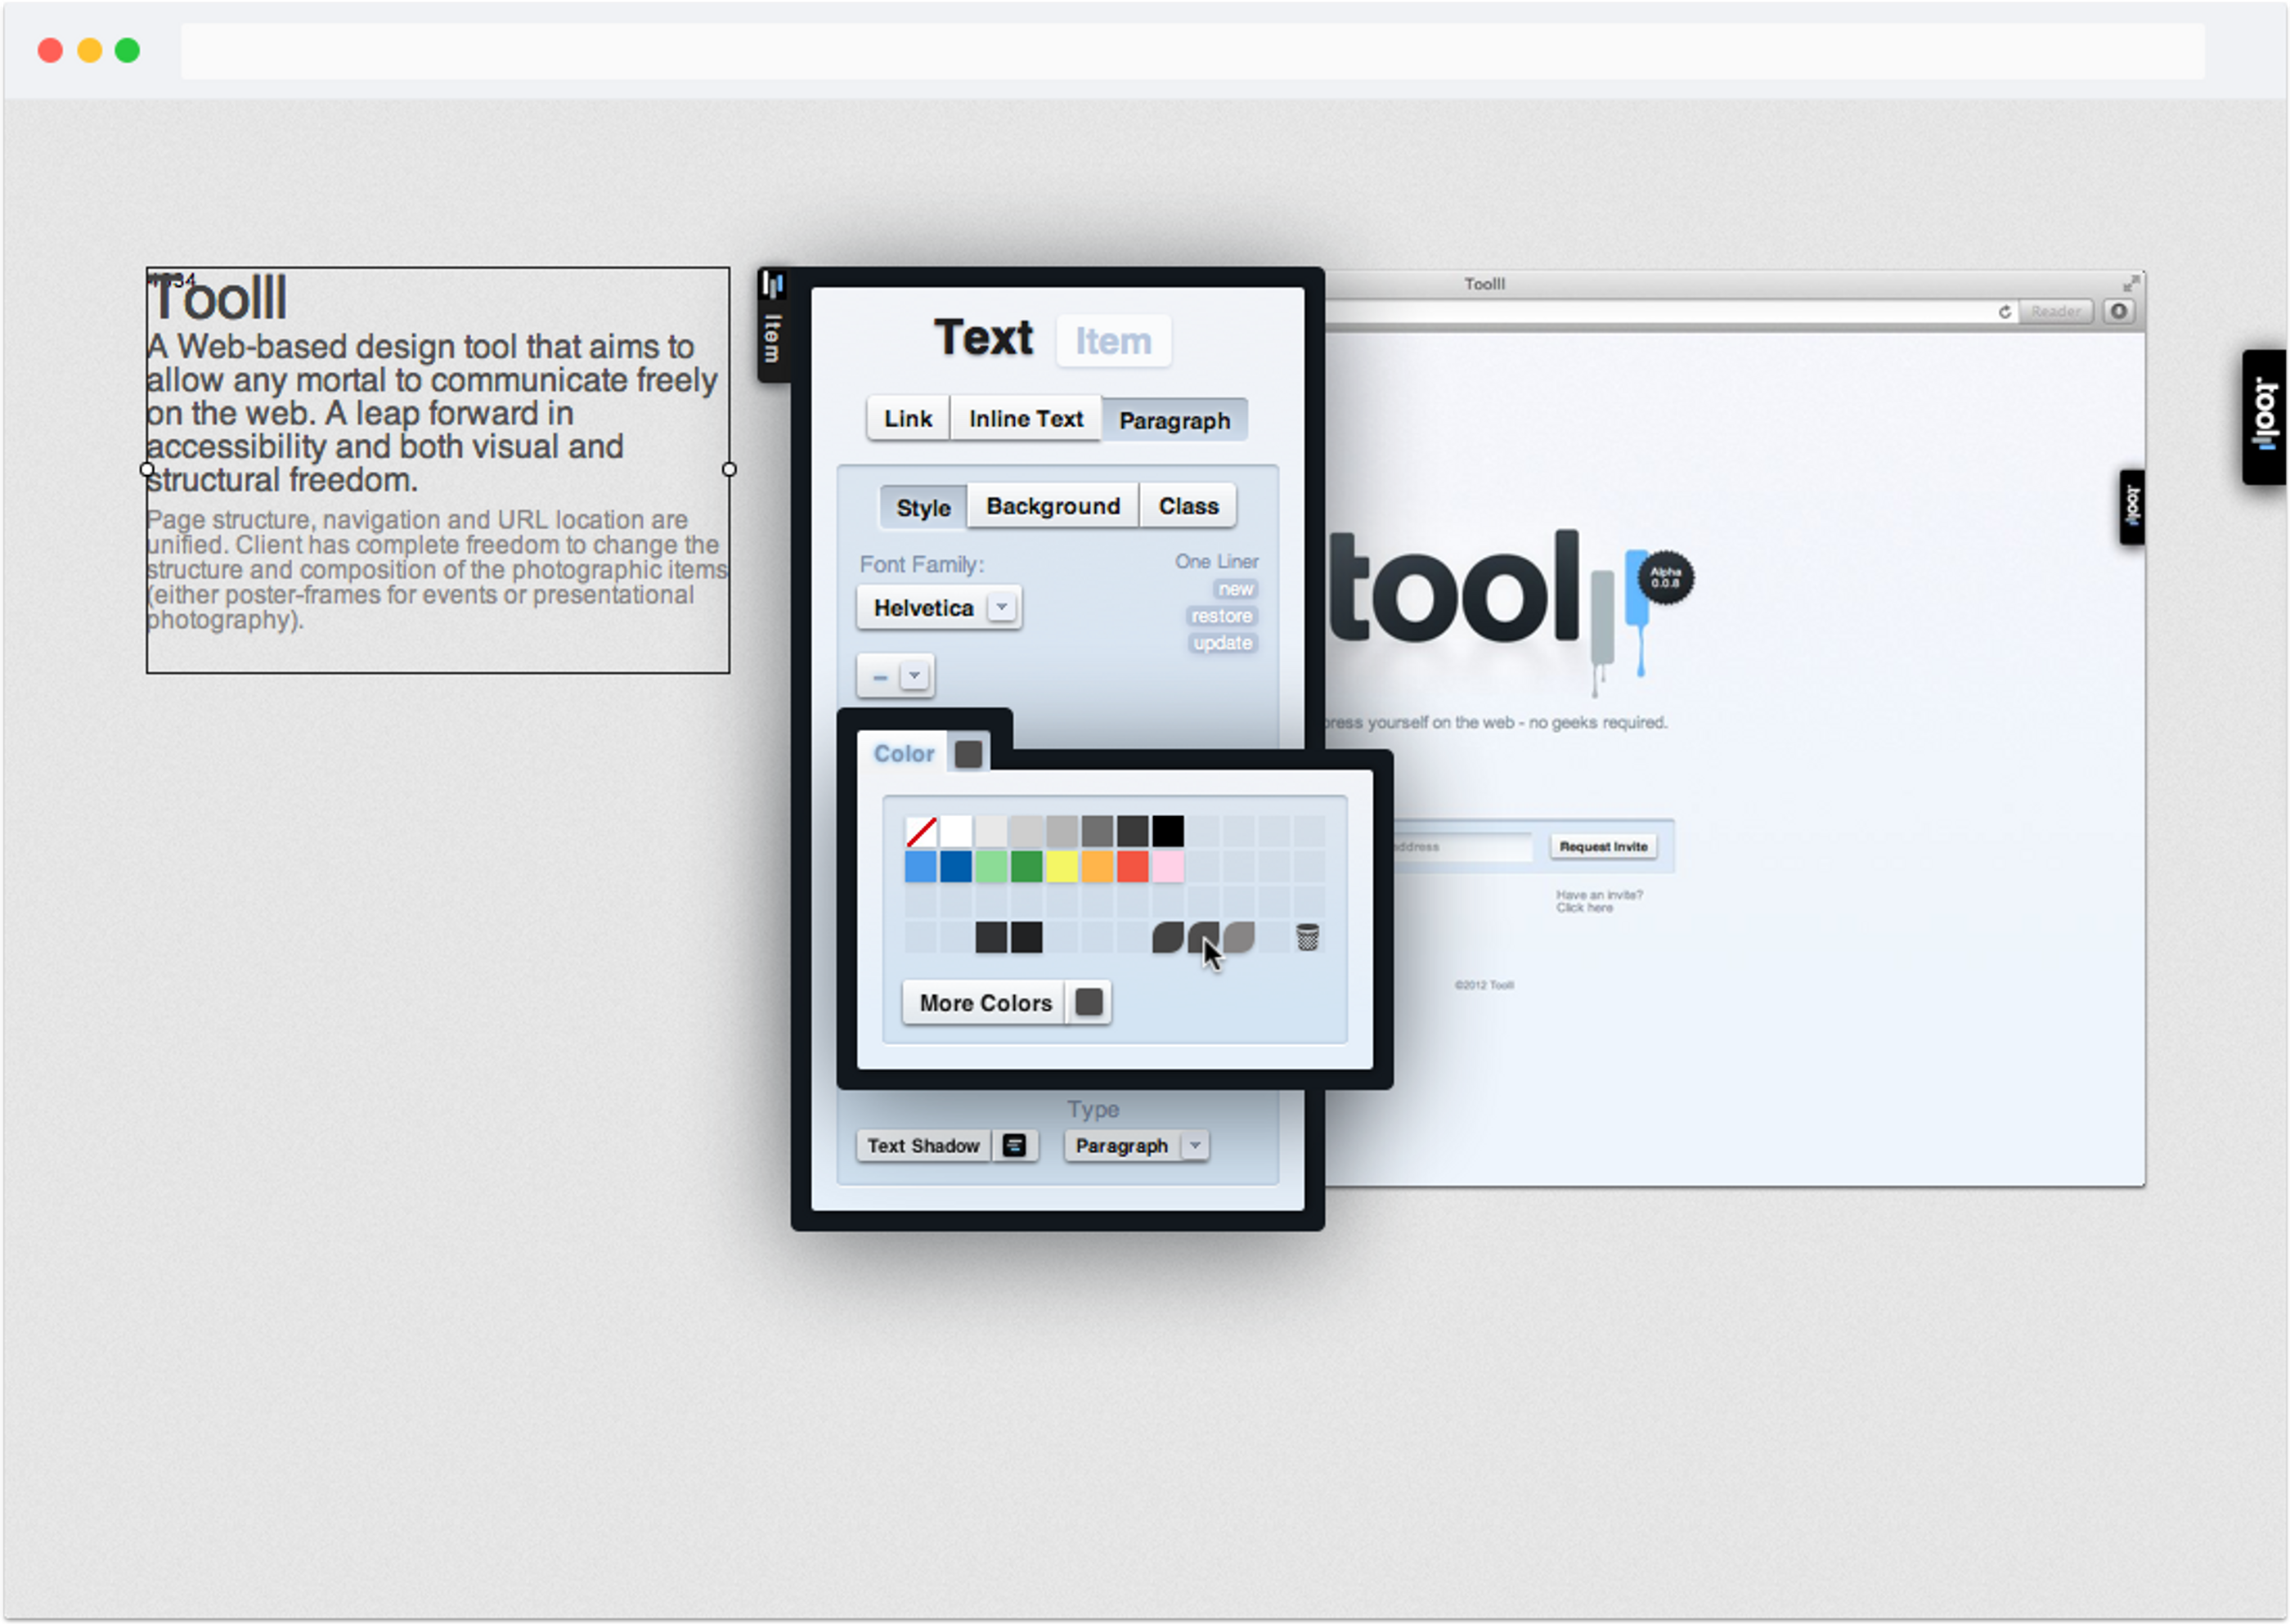 Digital product design and development for “Toolll”